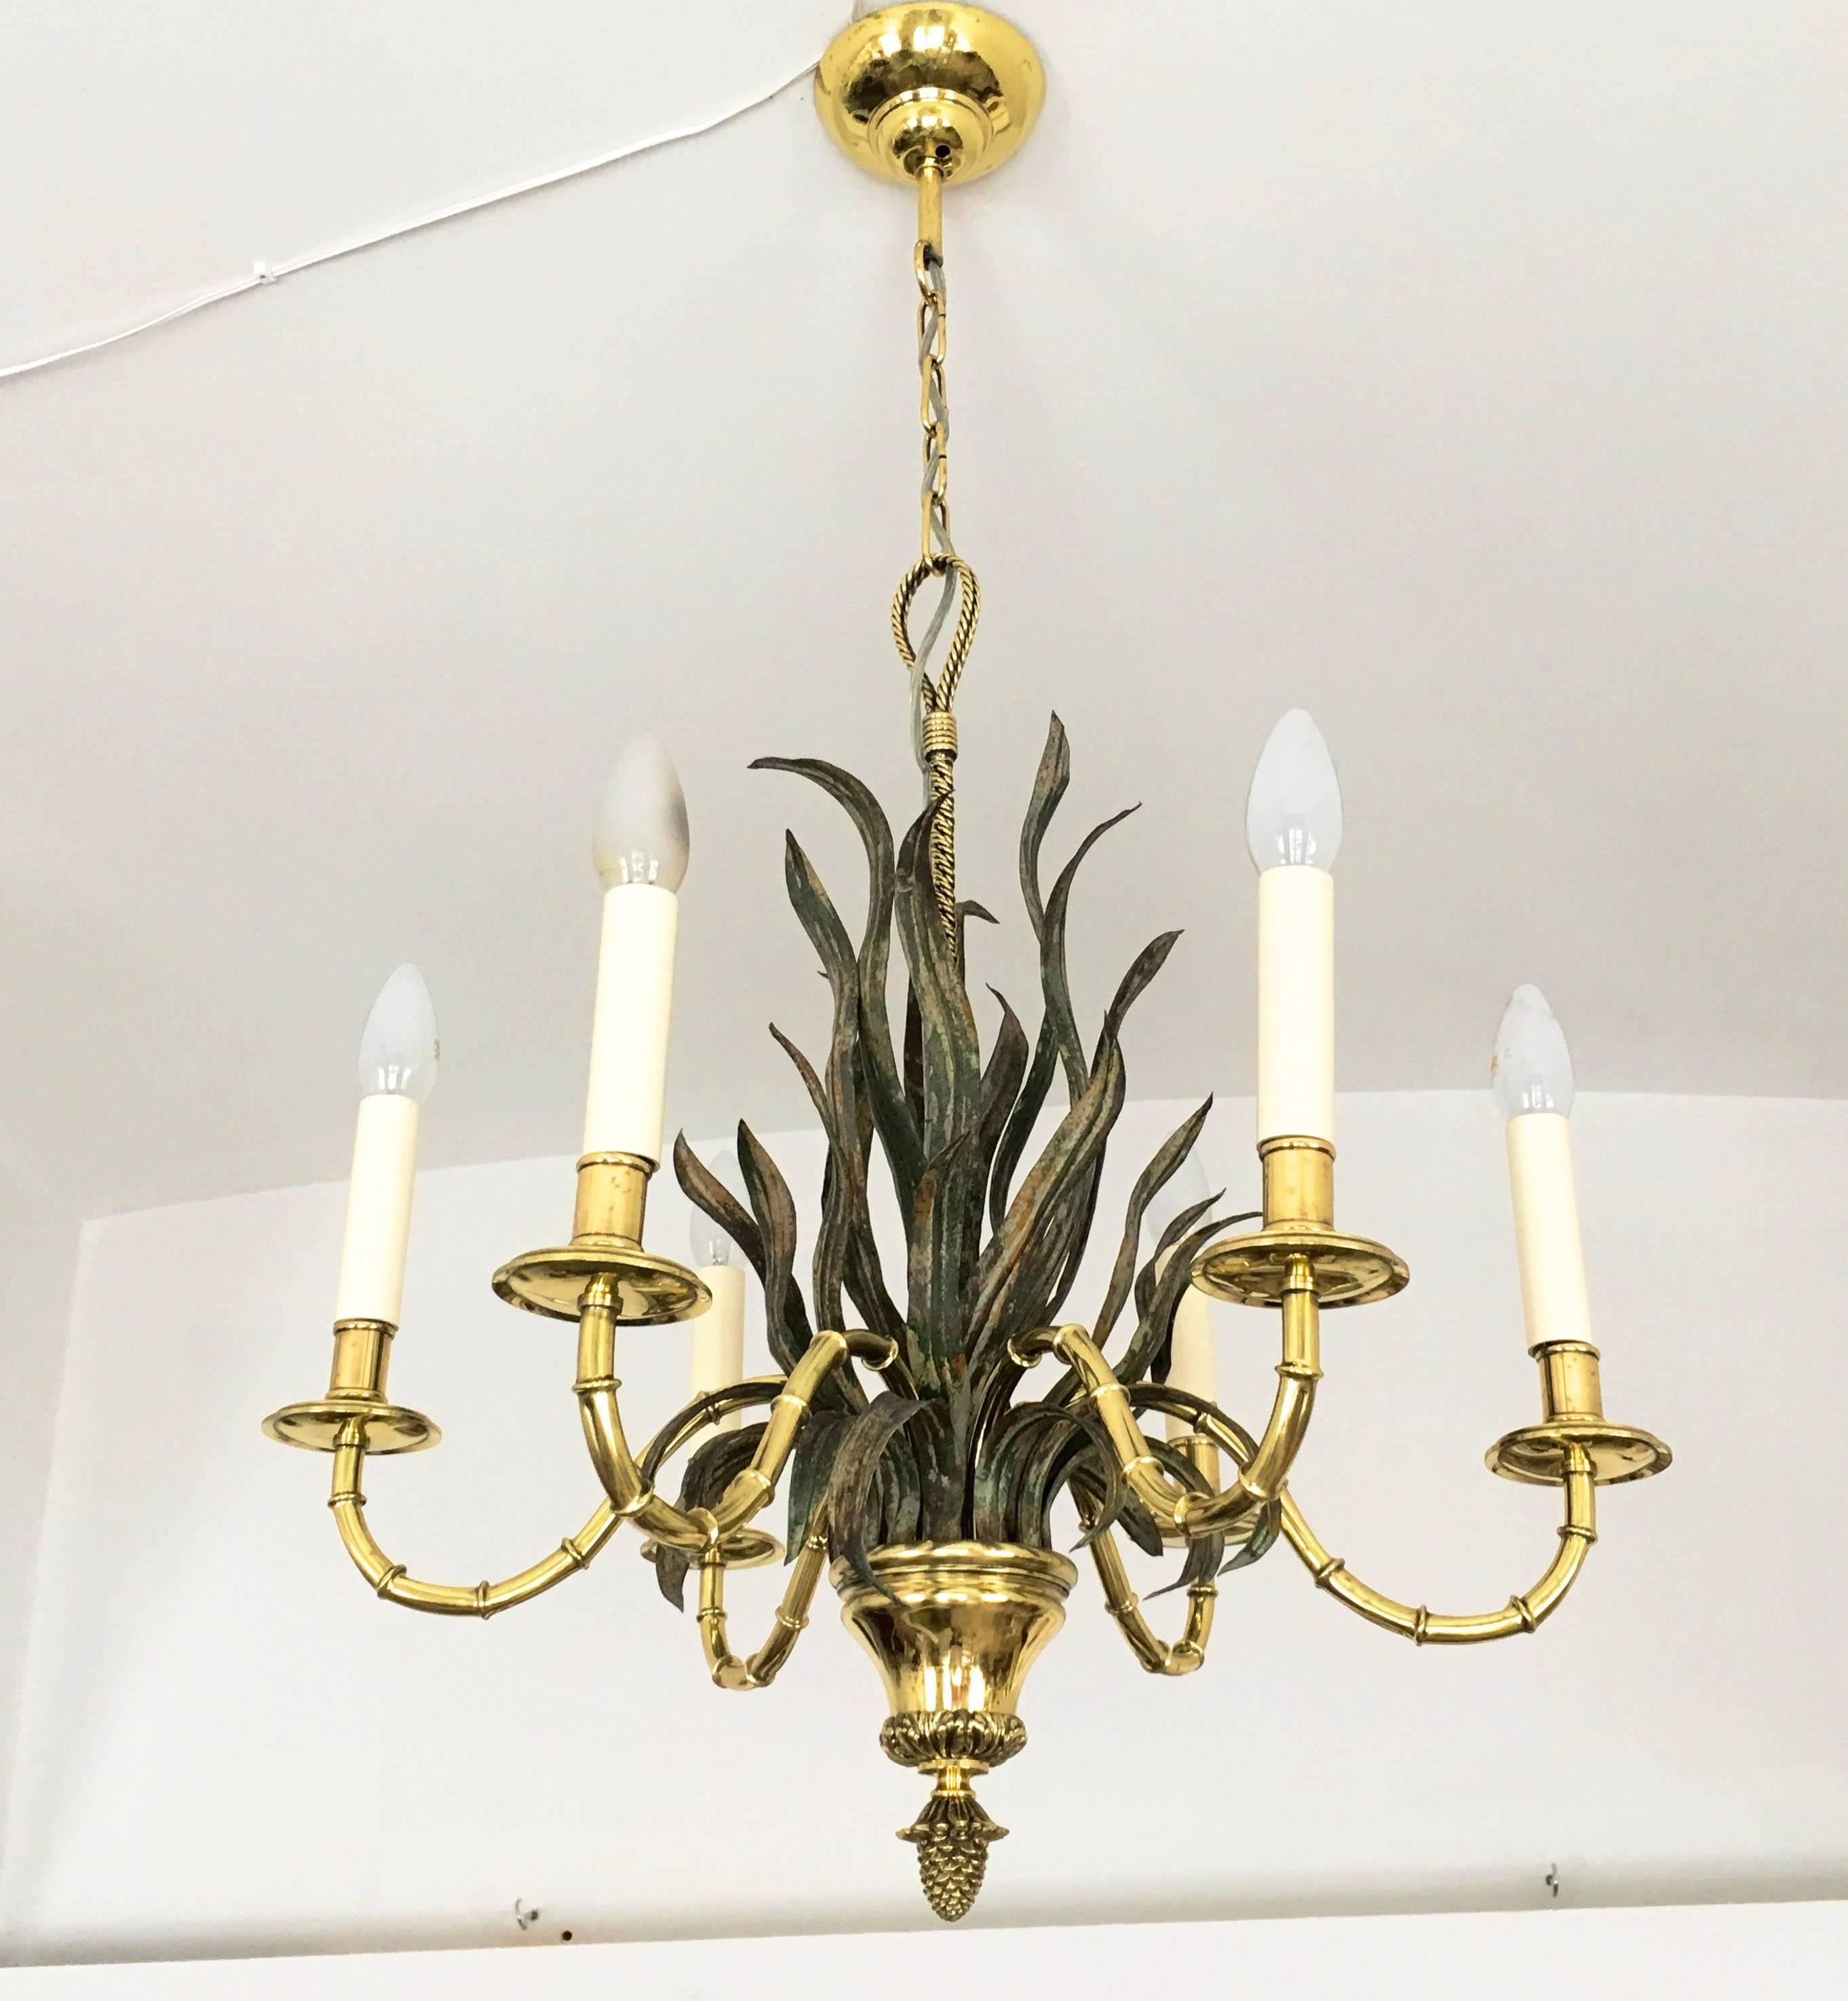 Six-arm chandelier with a bamboo motif by La Maison Baguès of Paris from the early 1950s. Gilt bronze and polychromed metal.
New electric, refurbished
Measures (without chain): 71cm high x 60cm diameter.